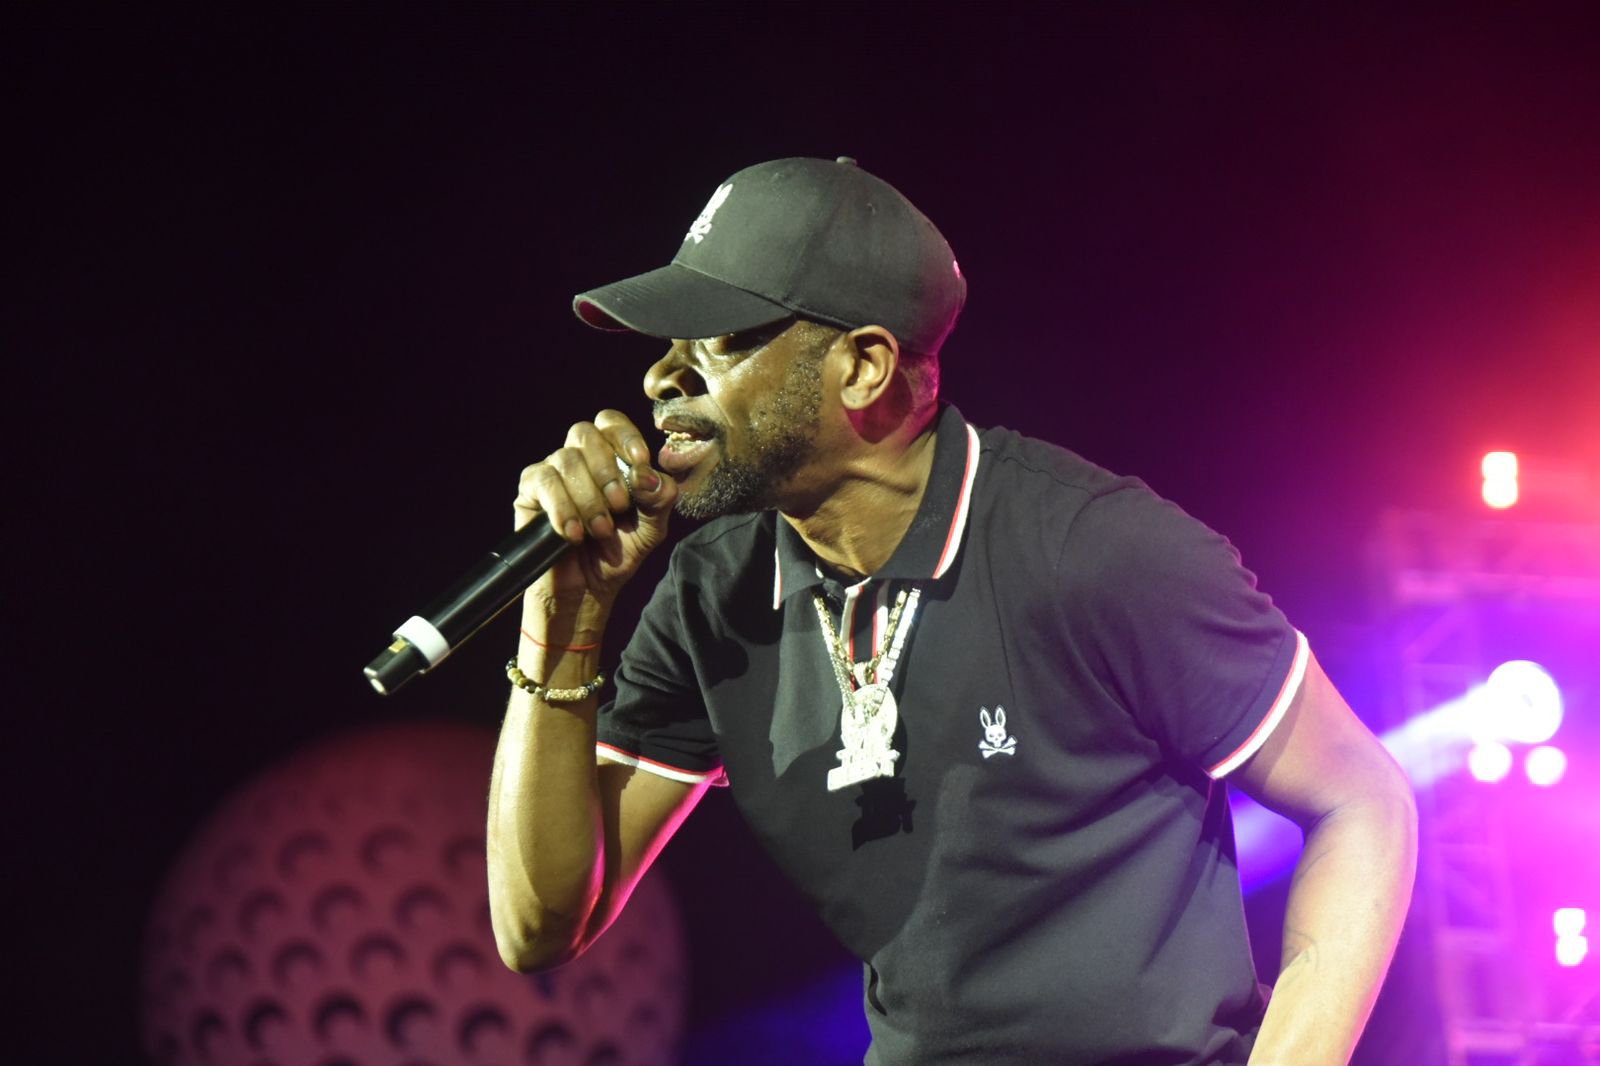 Bounty Killer Covers Barry White’s Hit Song ‘Practice What You Preach’